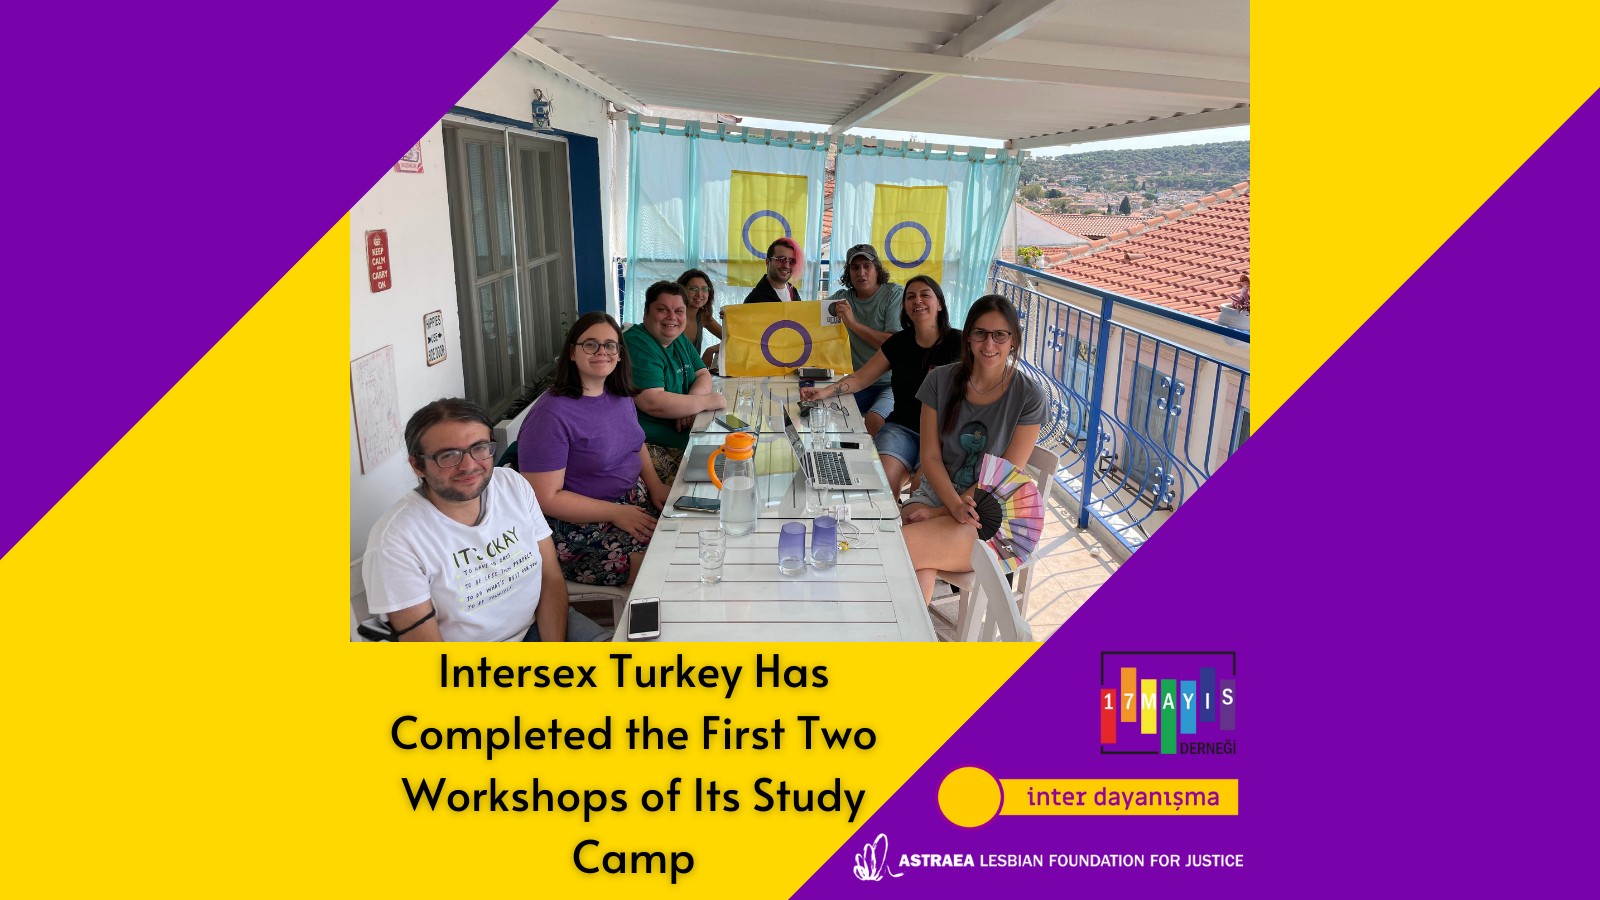 Intersex Turkey Has Completed the First Two Workshops of Its Study Camp - May 17 Association